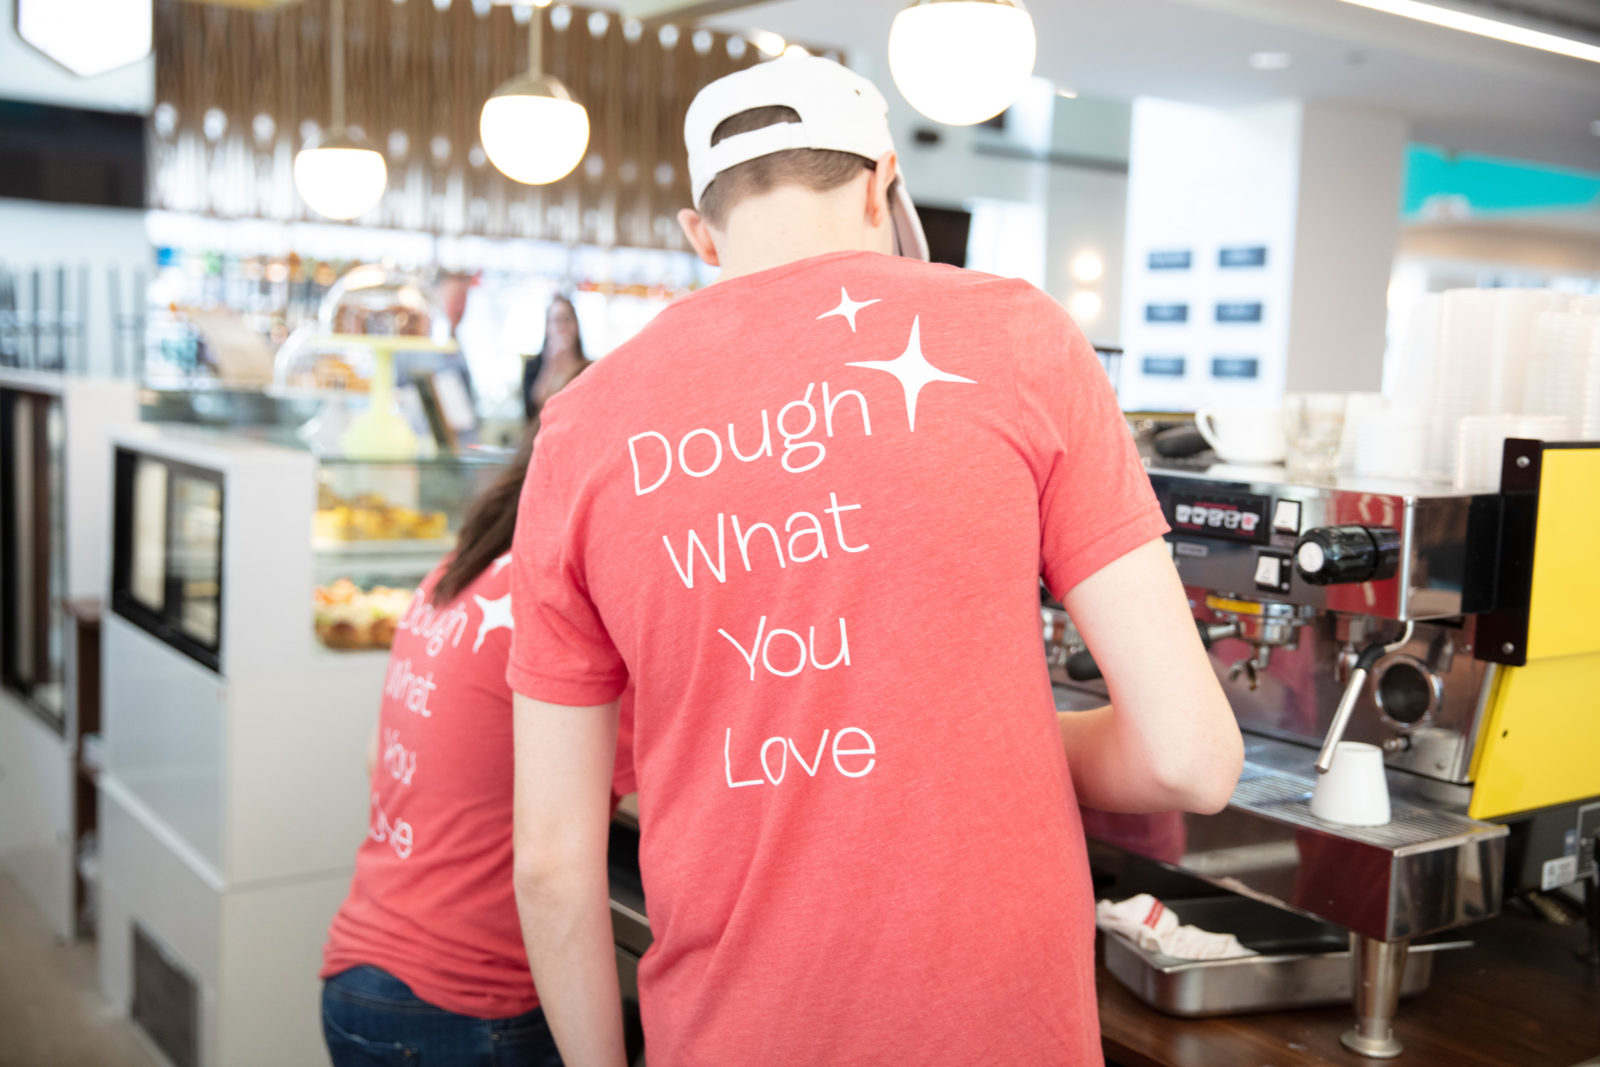 Associates making coffee at Spark'd with shirts that say "Dough what you love"